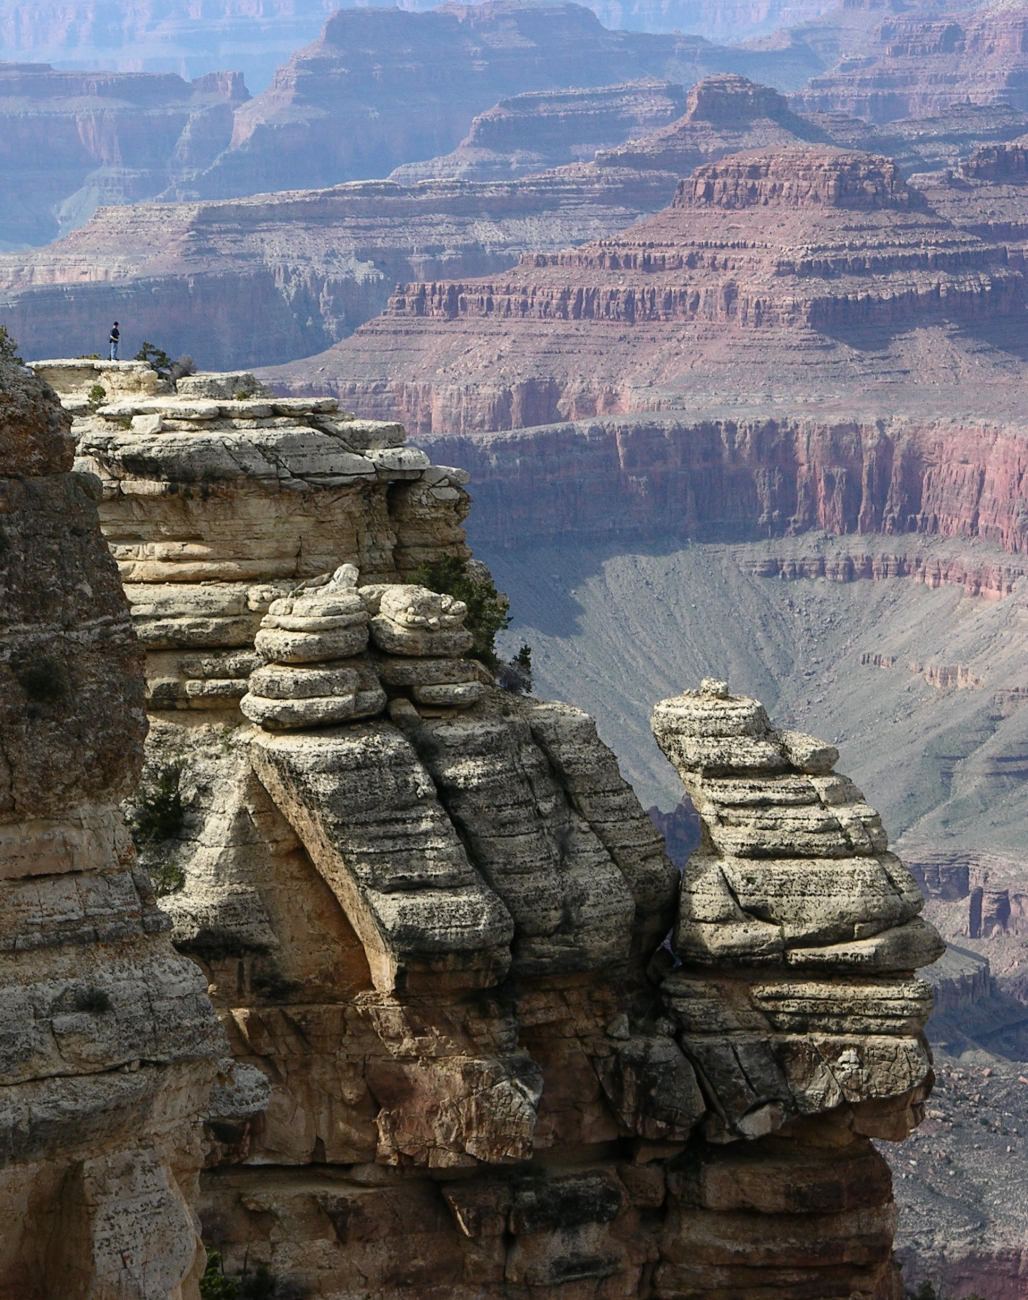 The Grand Canyon dwarfing a human observer